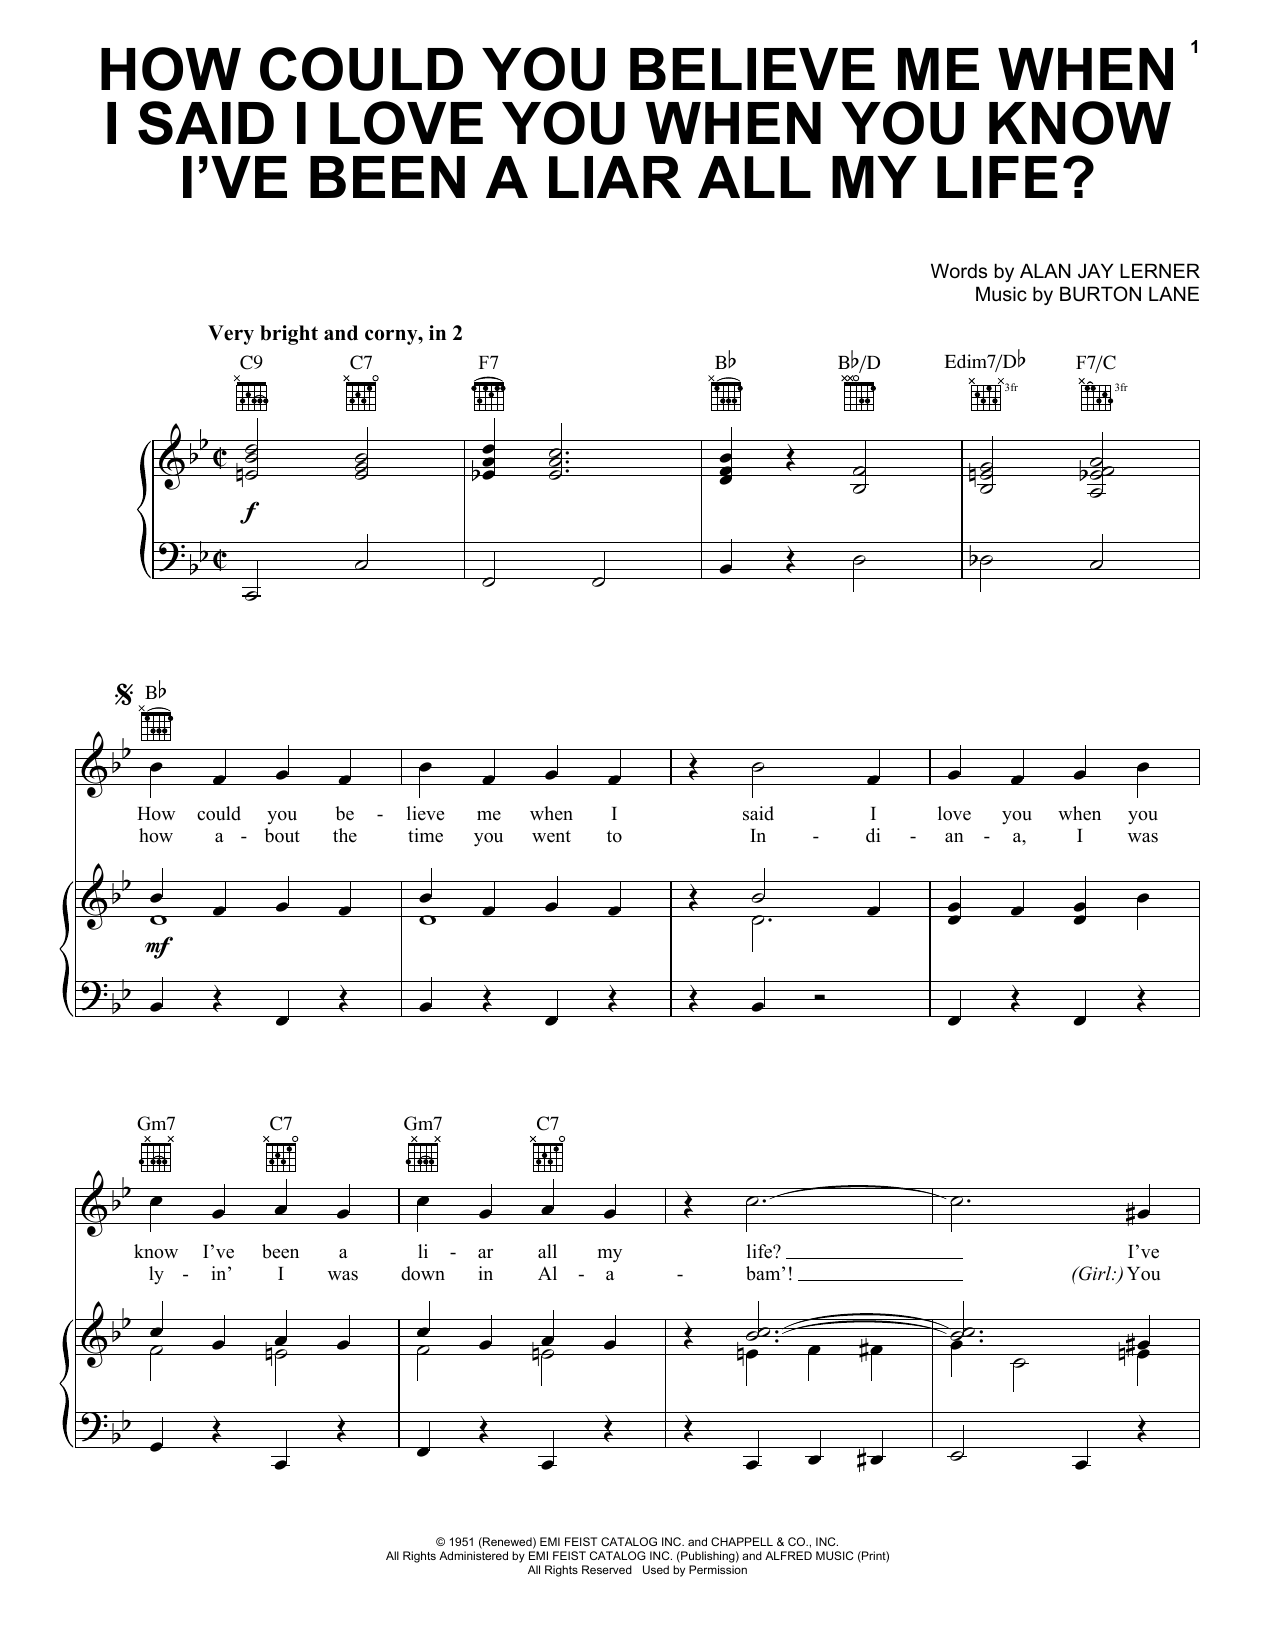 Alan Jay Lerner How Could You Believe Me When I Said I Love You When You Know I've Been A Liar All My Life? sheet music notes and chords. Download Printable PDF.